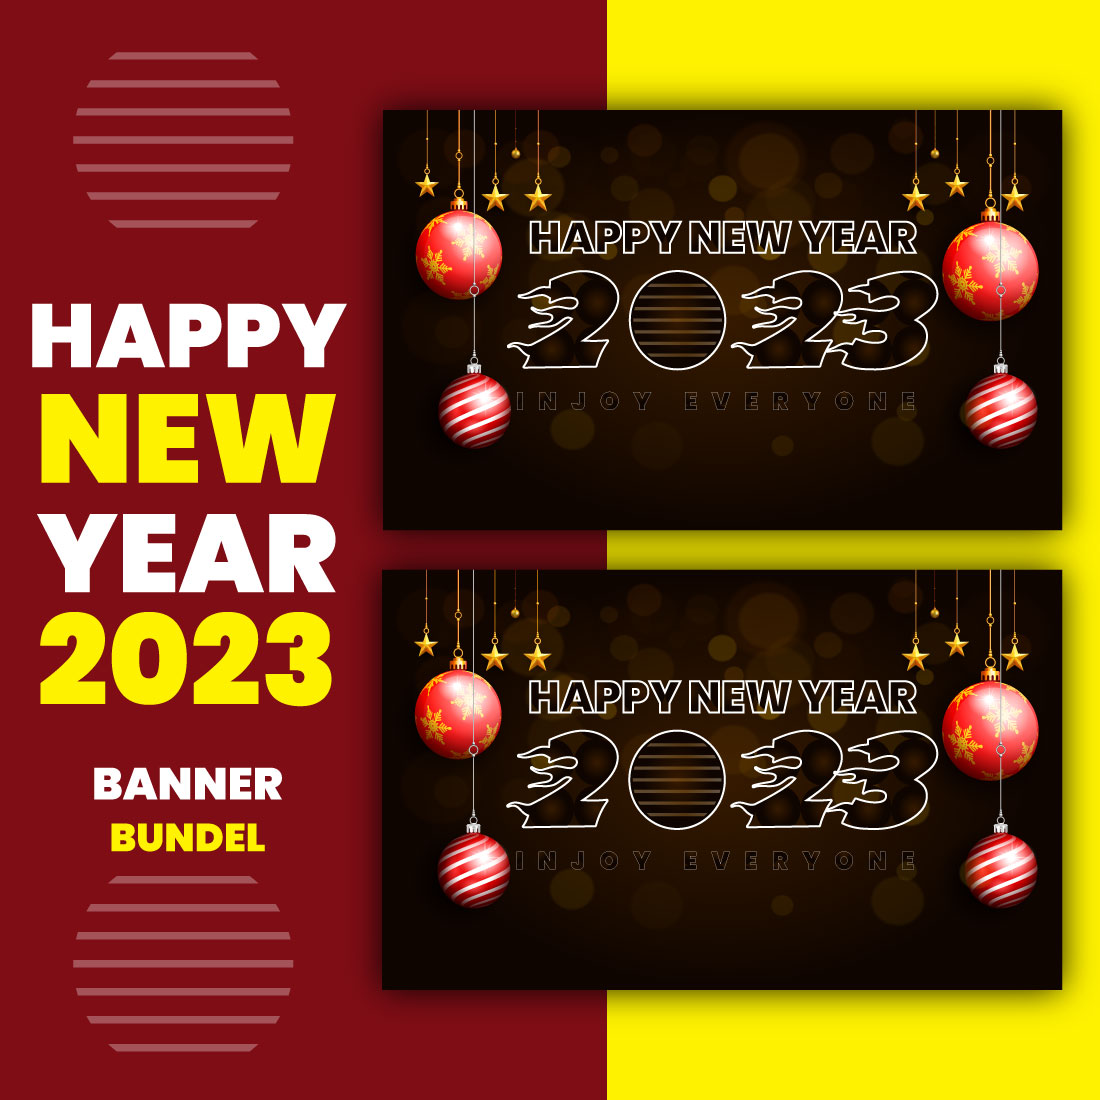 New Year Banner Design cover image.